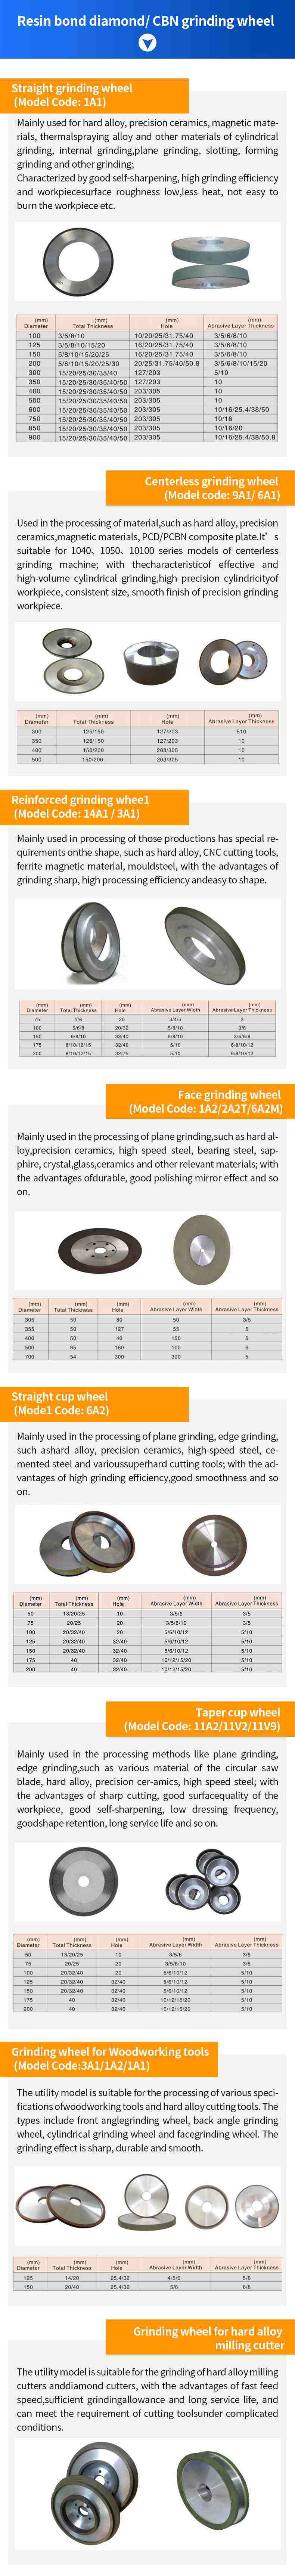 Gold resin bonded diamond grinding wheel blades 350 * 32 * 127 * 15 * 10 customized by the manufacturer